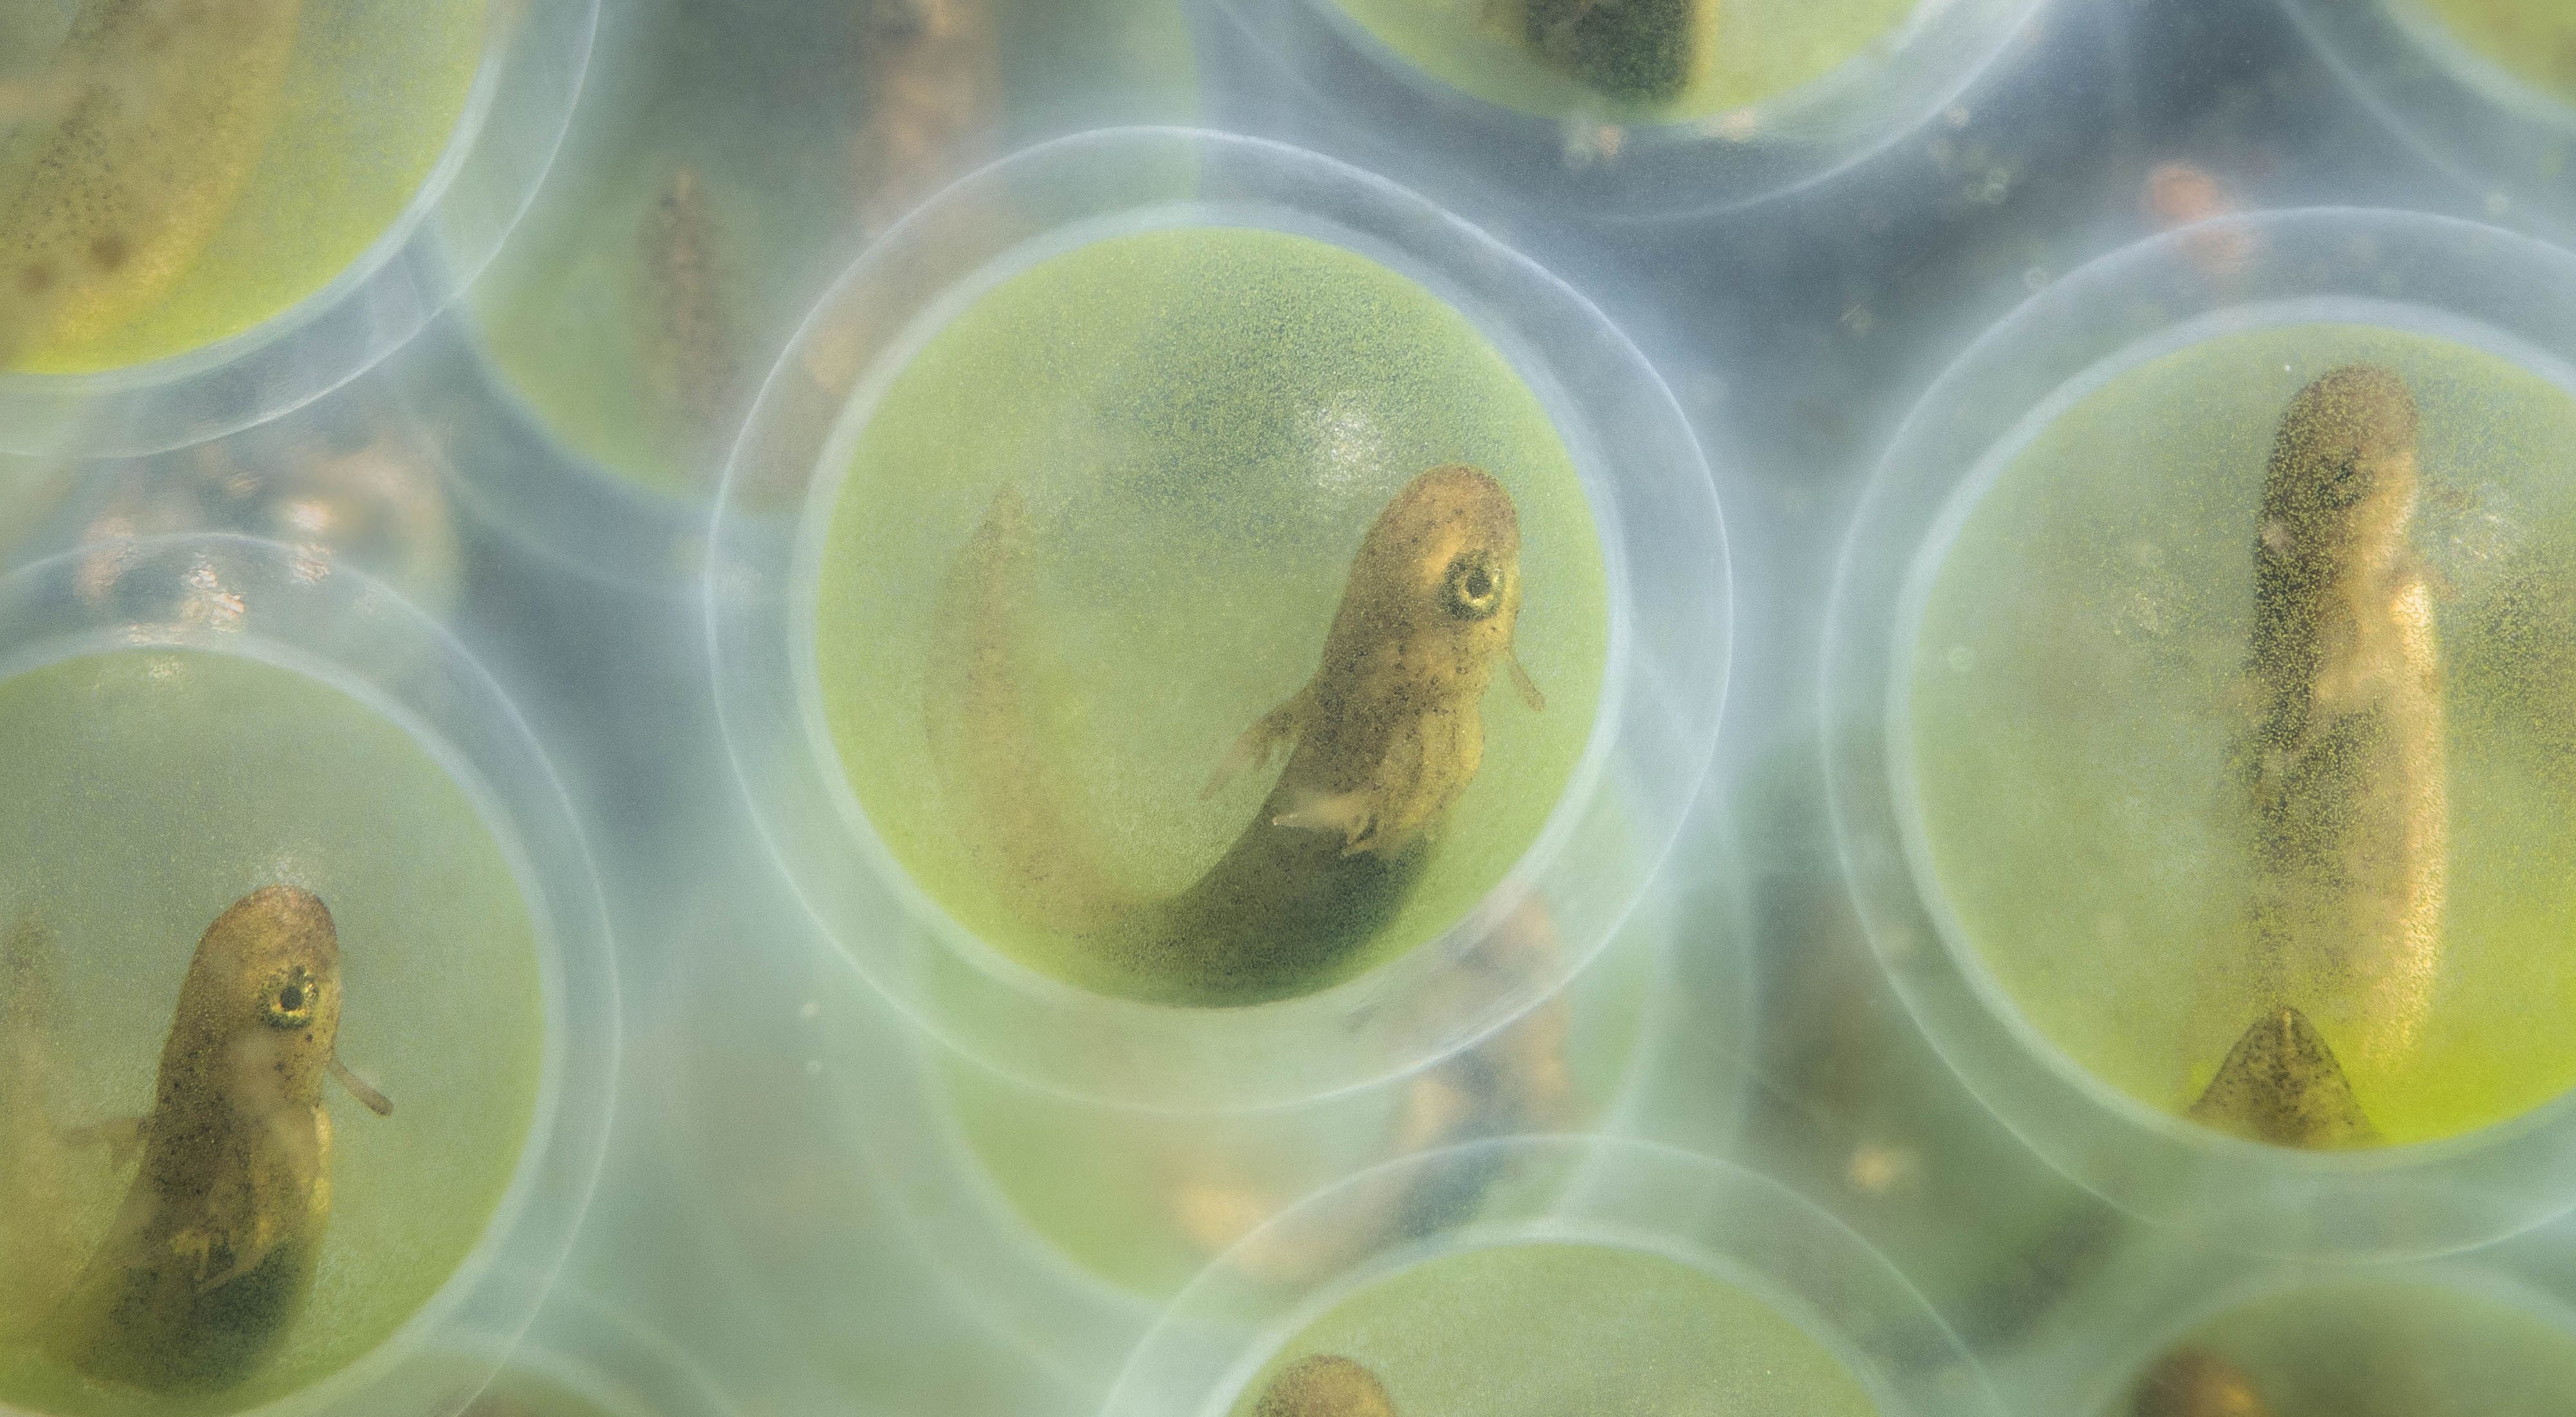 close in image of lime green bubbles with partially formed creatures inside